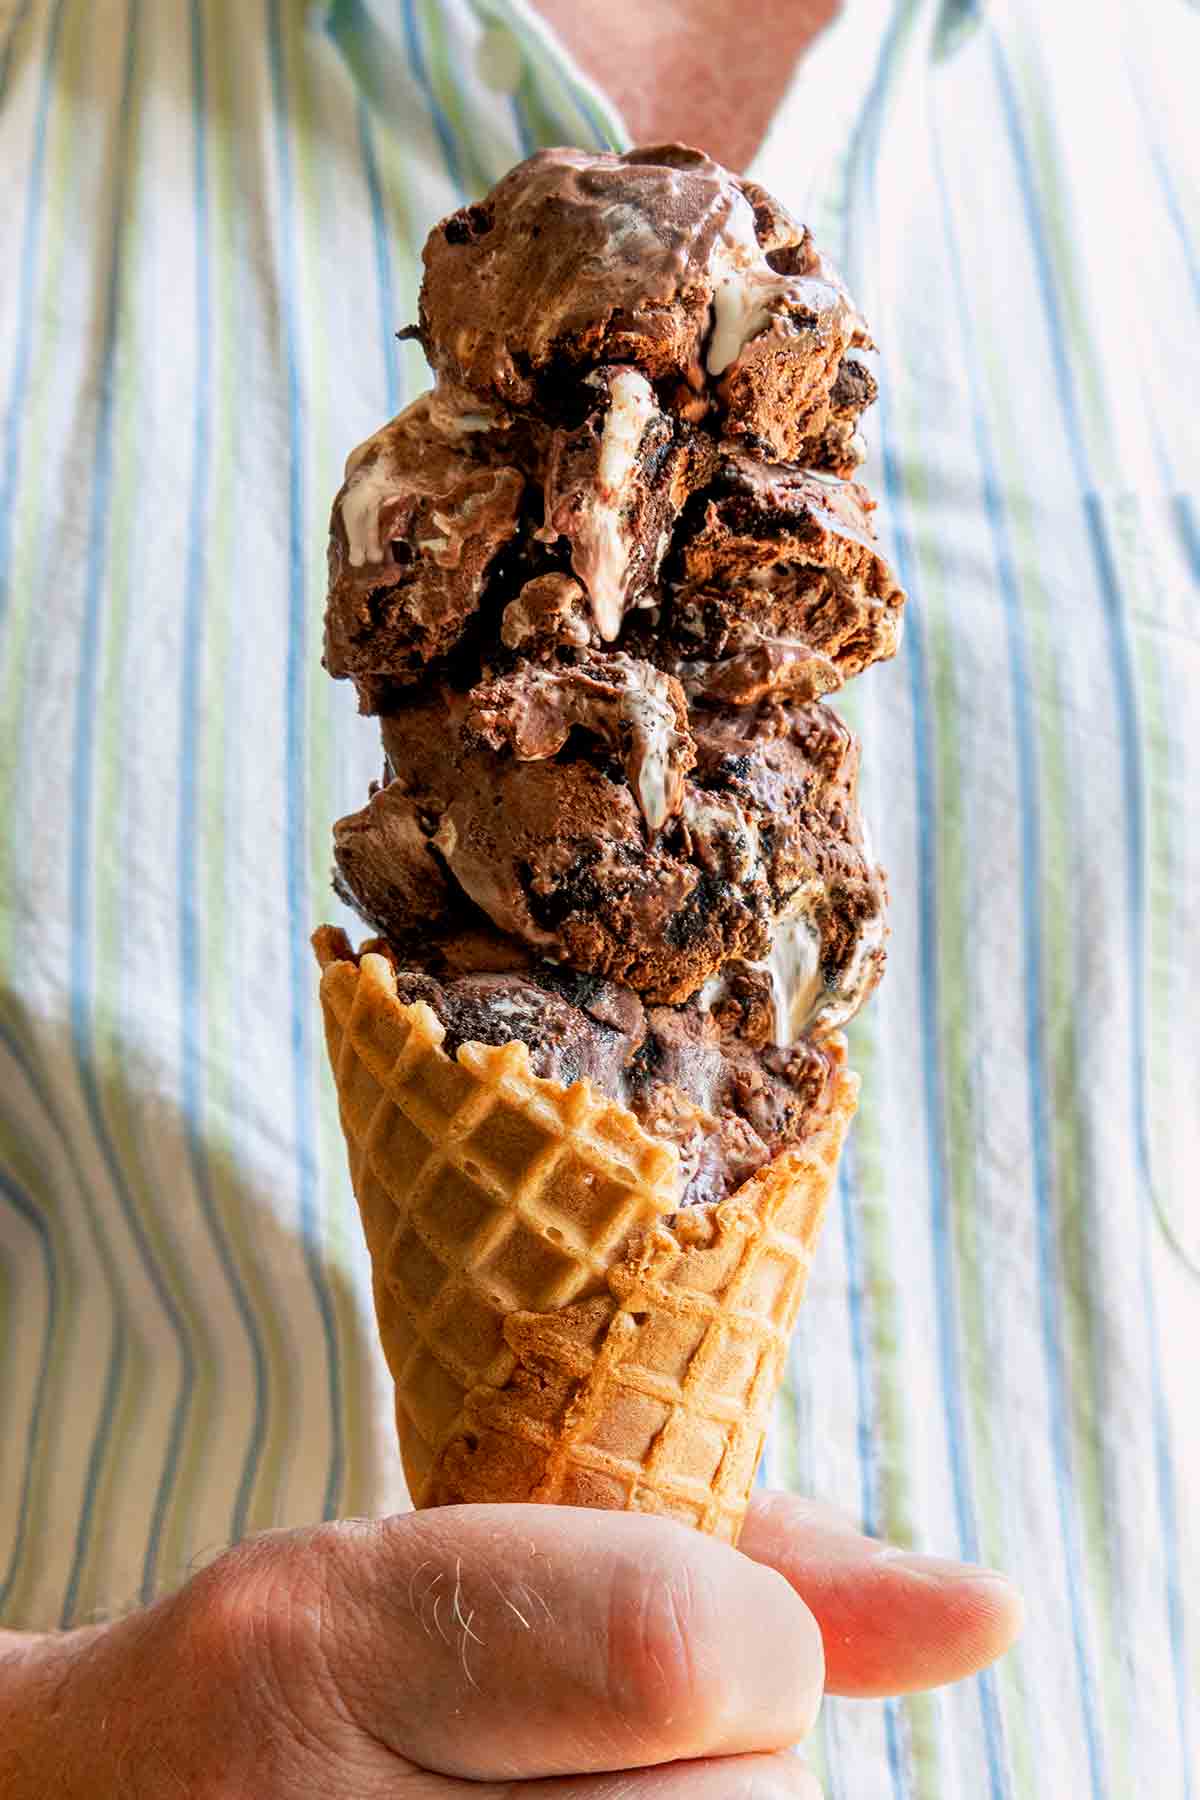 A man holding a waffle cone filled with four scoops of chocolate Oreo ice cream.